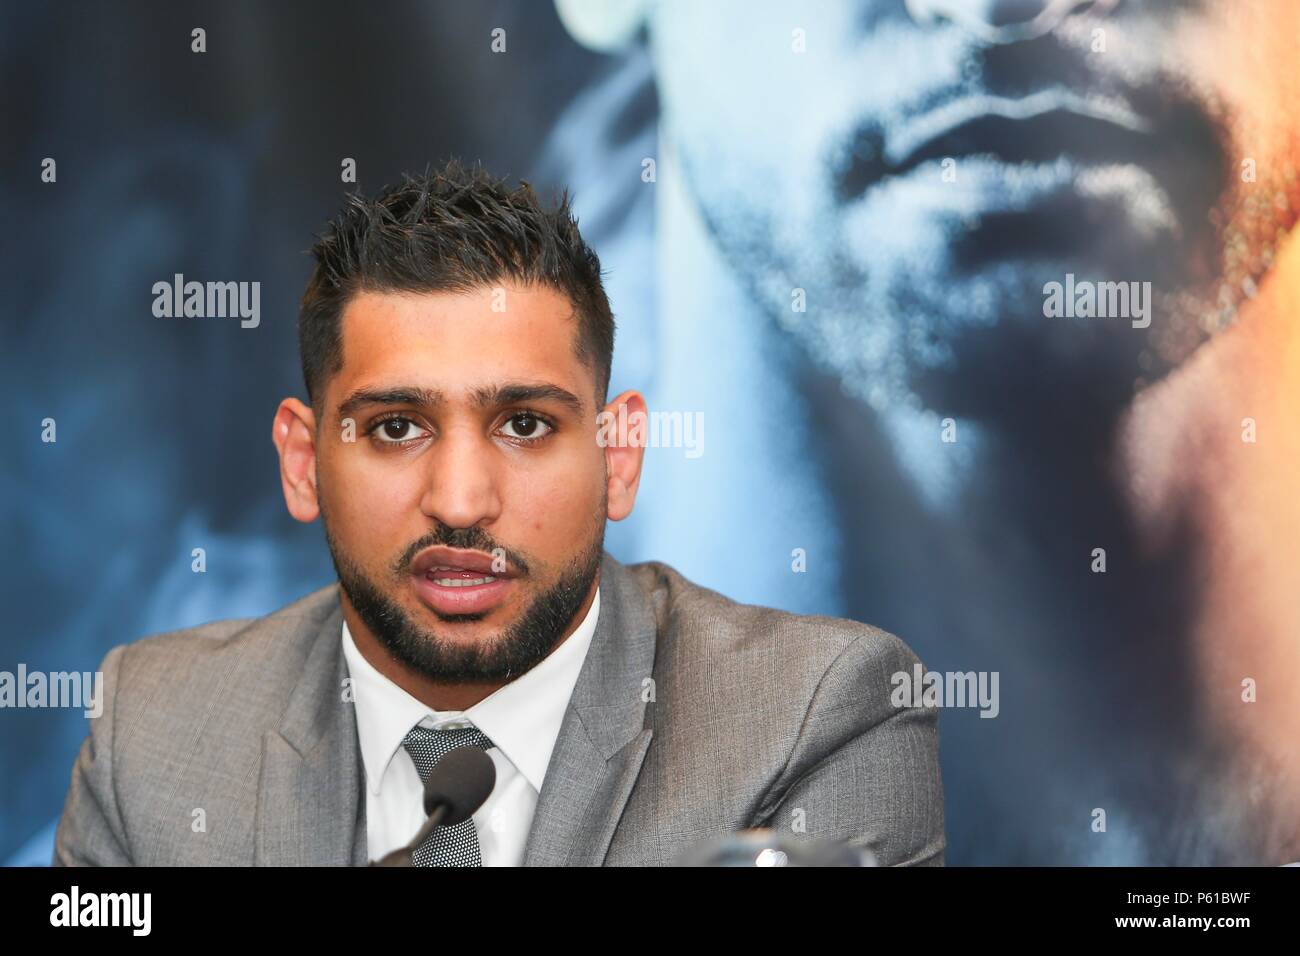 Amir Khan, British welterweight boxer portrait at a press conference 2018 Stock Photo